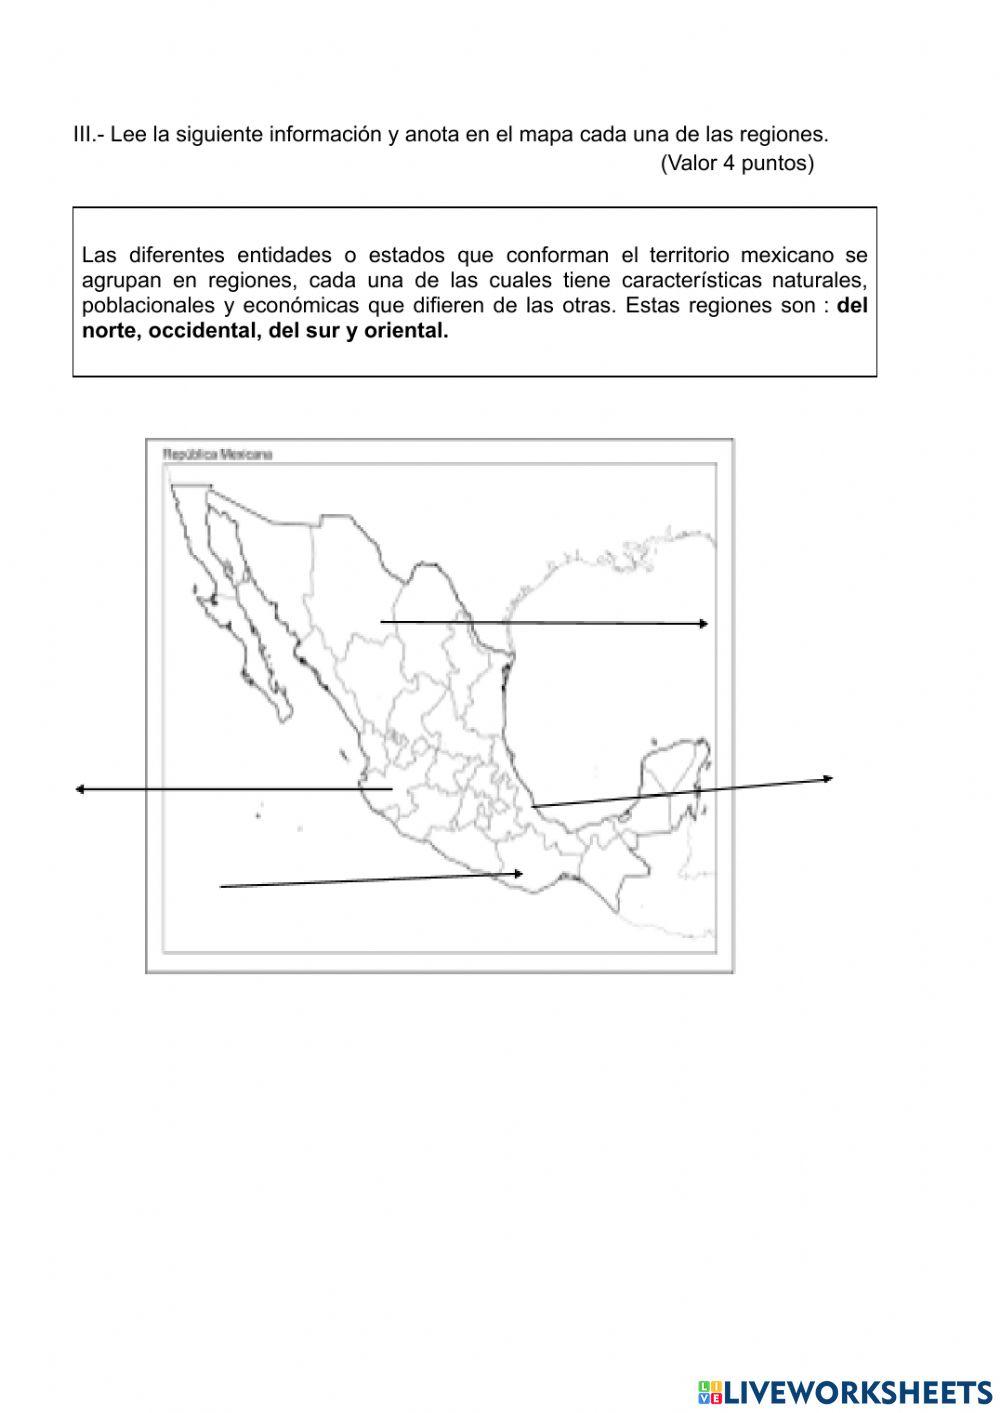 Geografãa to online exercise for live worksheets